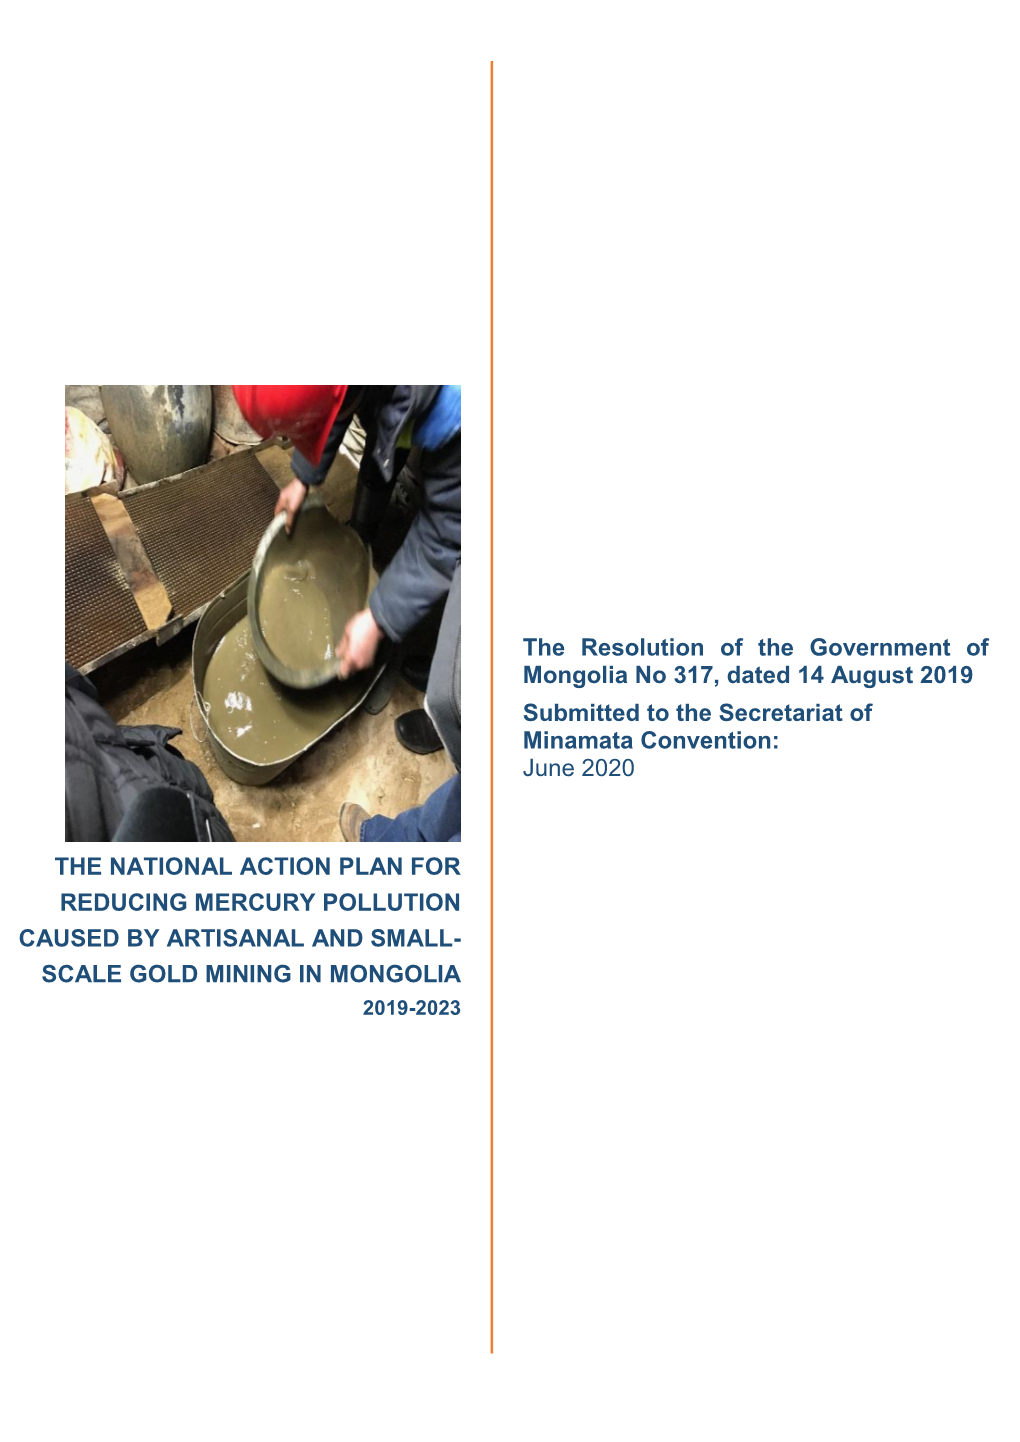 Scale Gold Mining in Mongolia 2019-2023